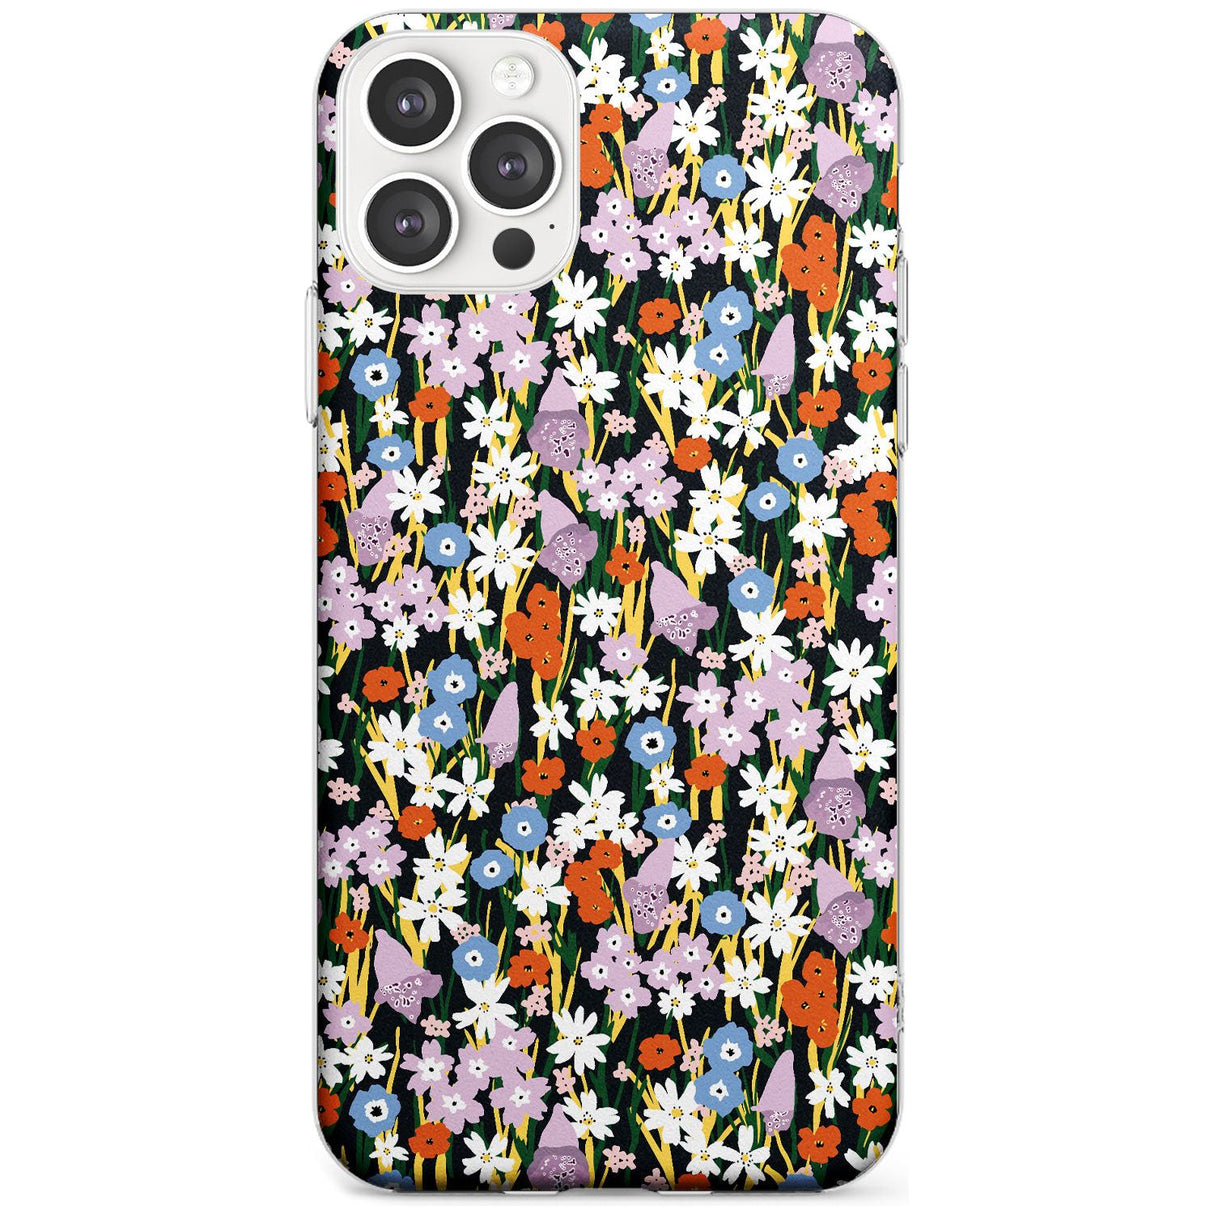 Energetic Floral Mix: Solid Black Impact Phone Case for iPhone 11 Pro Max